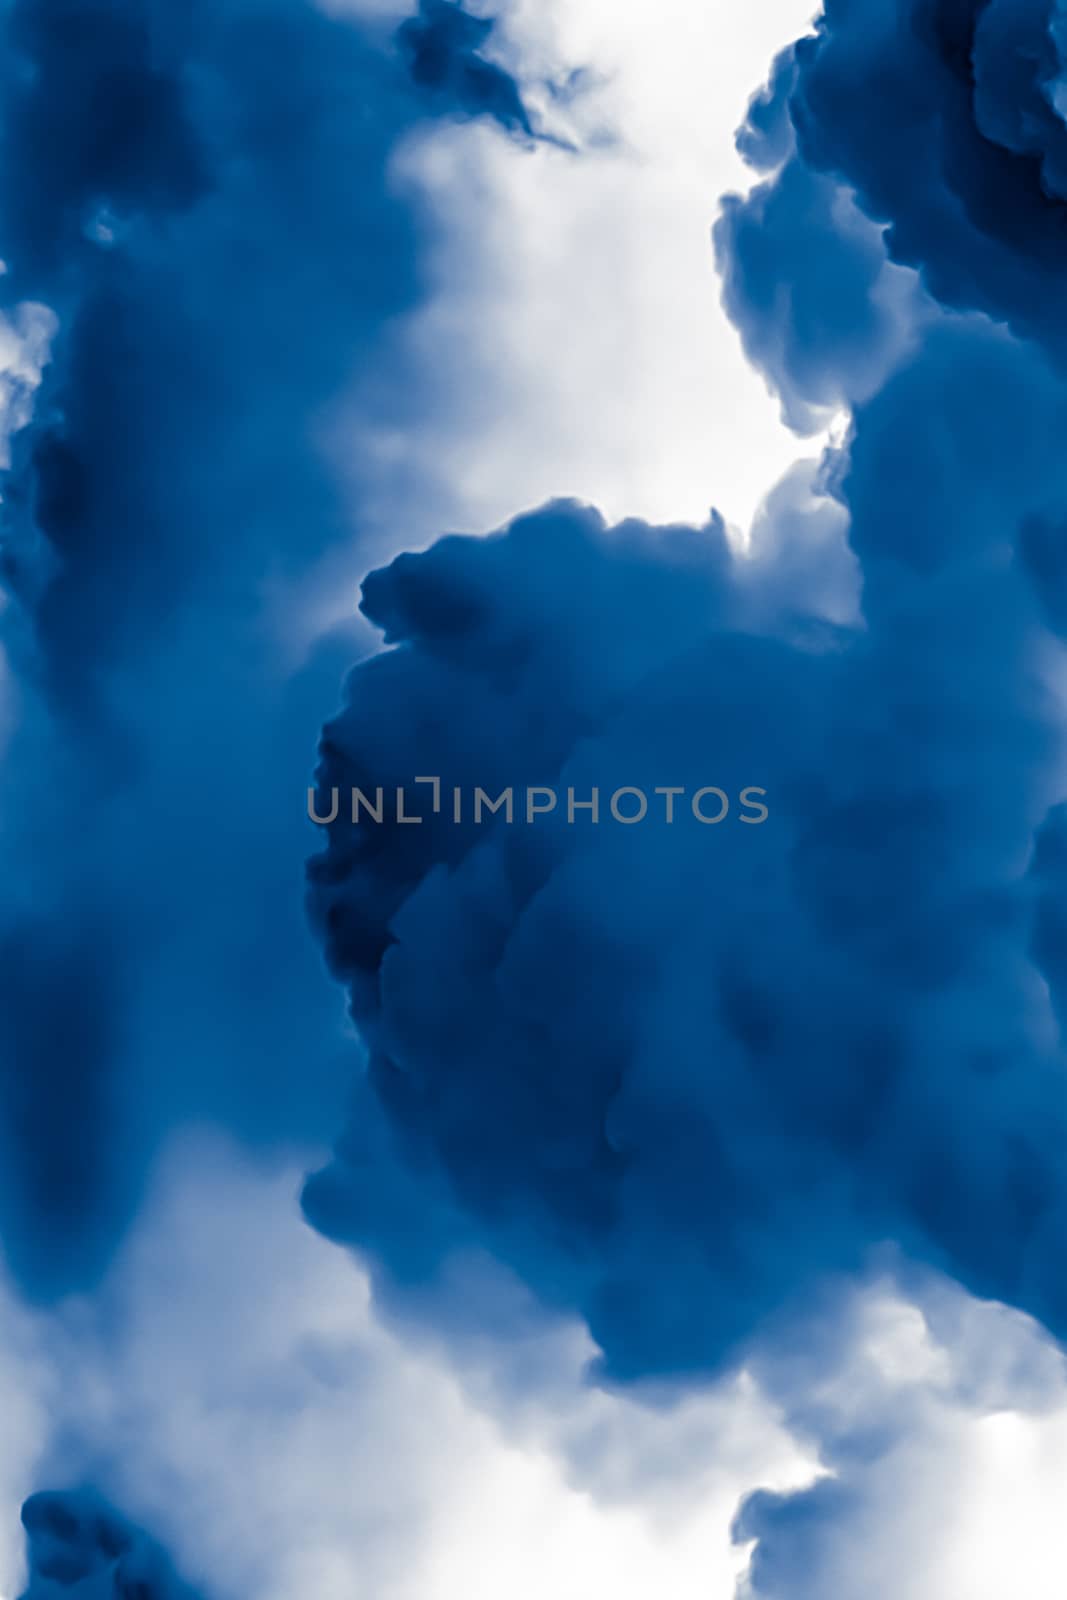 Minimalistic blue cloudy background as abstract backdrop, minimal design and artistic splashes